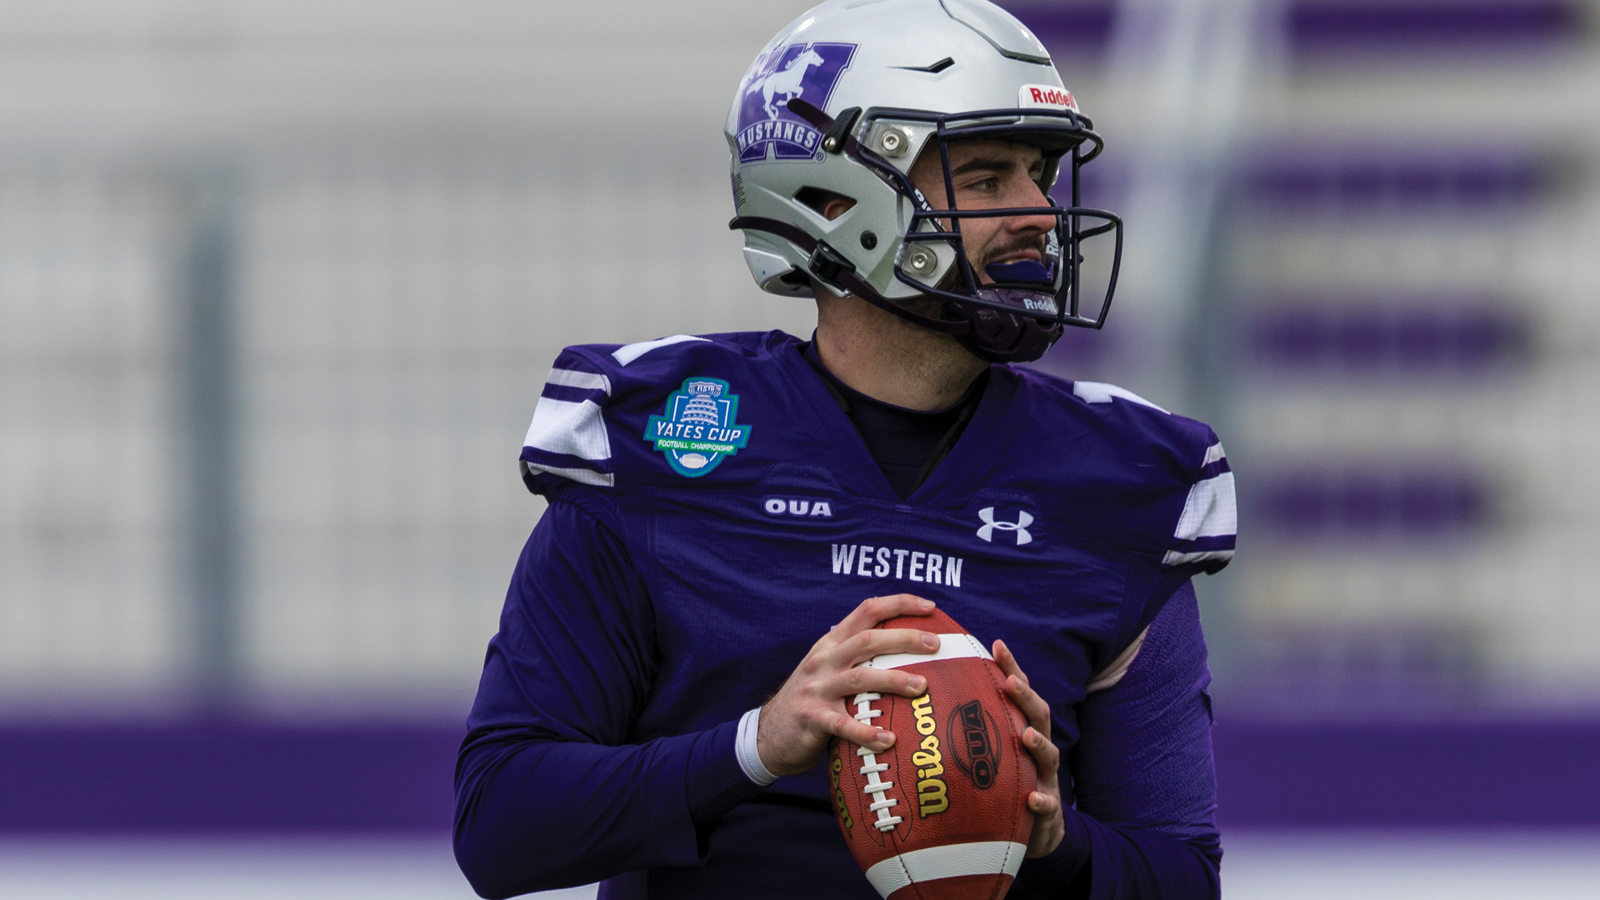 Western quarterback Evan Hillock dropping back to throw the ball during the Yates Cup